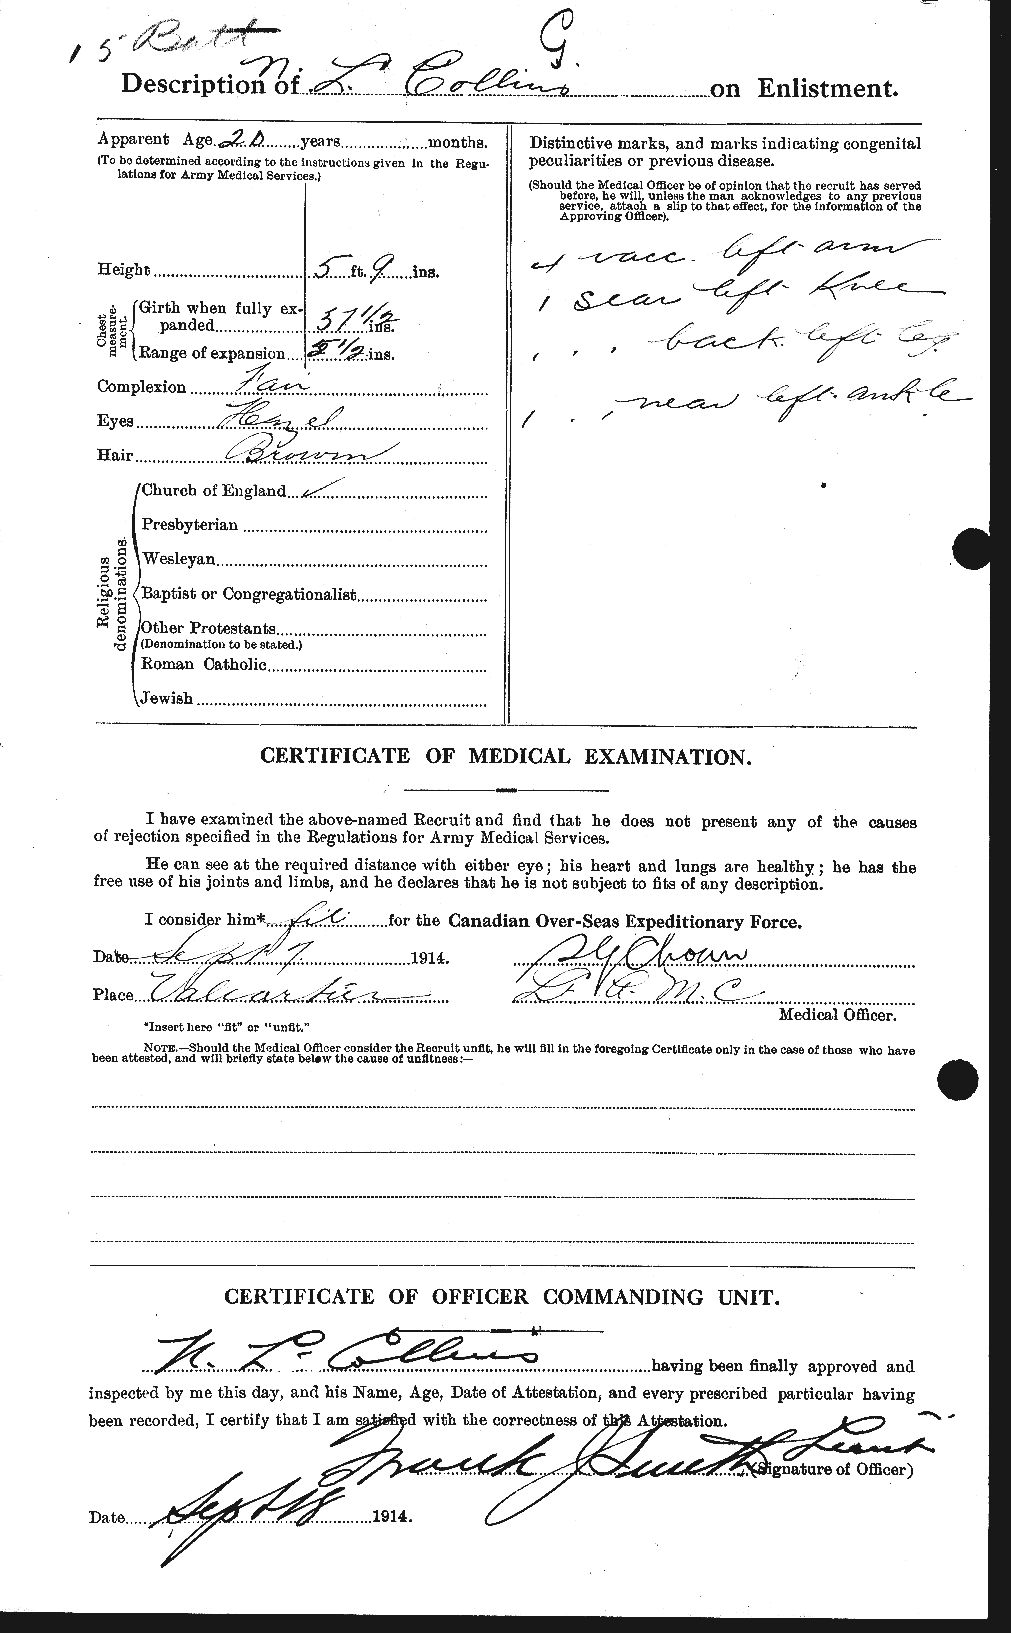 Personnel Records of the First World War - CEF 069310b